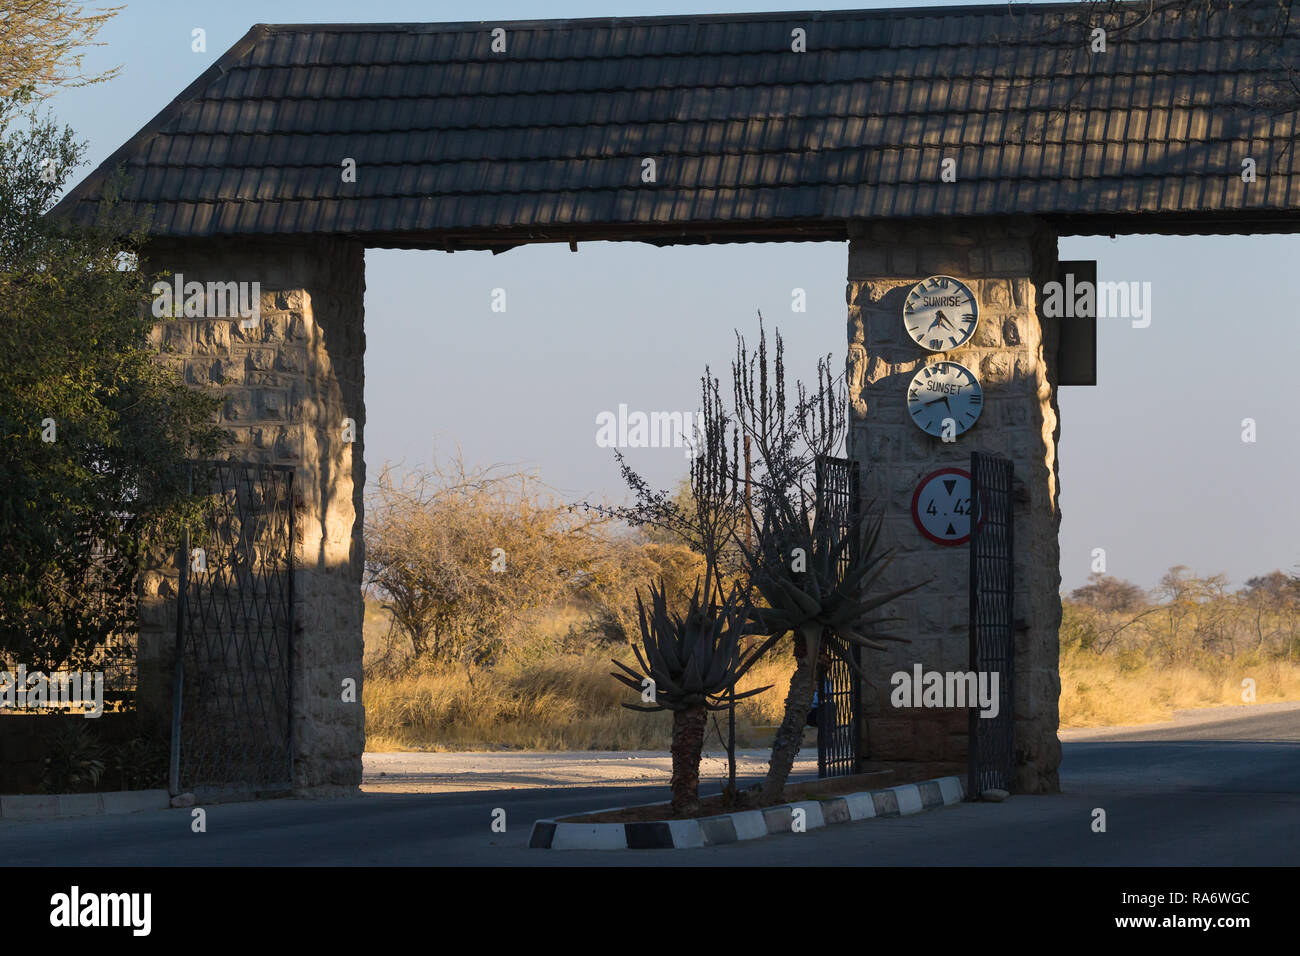 Okaukuejo rest camp gate open and giving times of closing and opening on a clock on the stone wall in Etosha National Park, Namibia Stock Photo